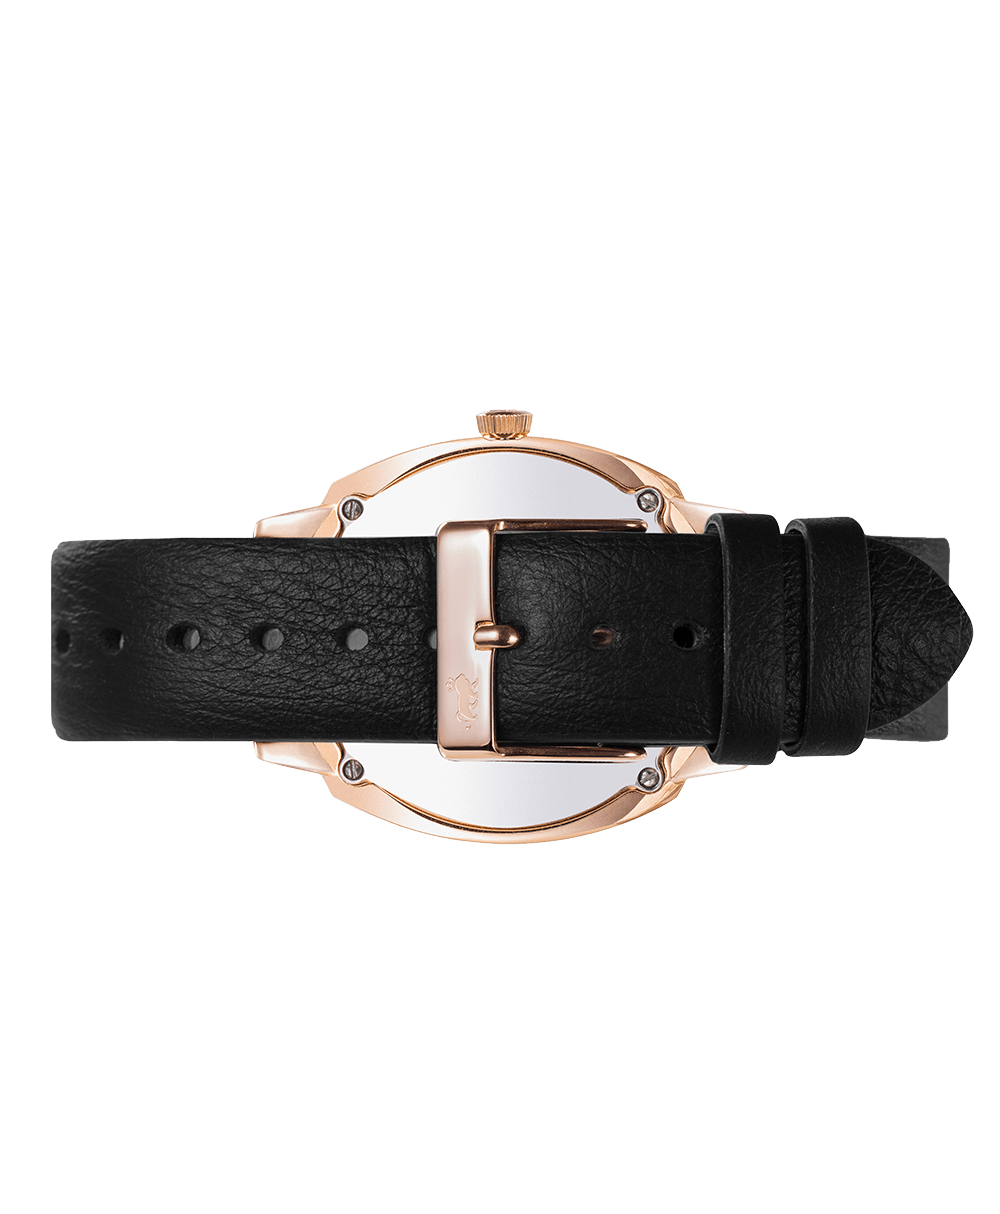 Meridian 38 mm or rose anthracite